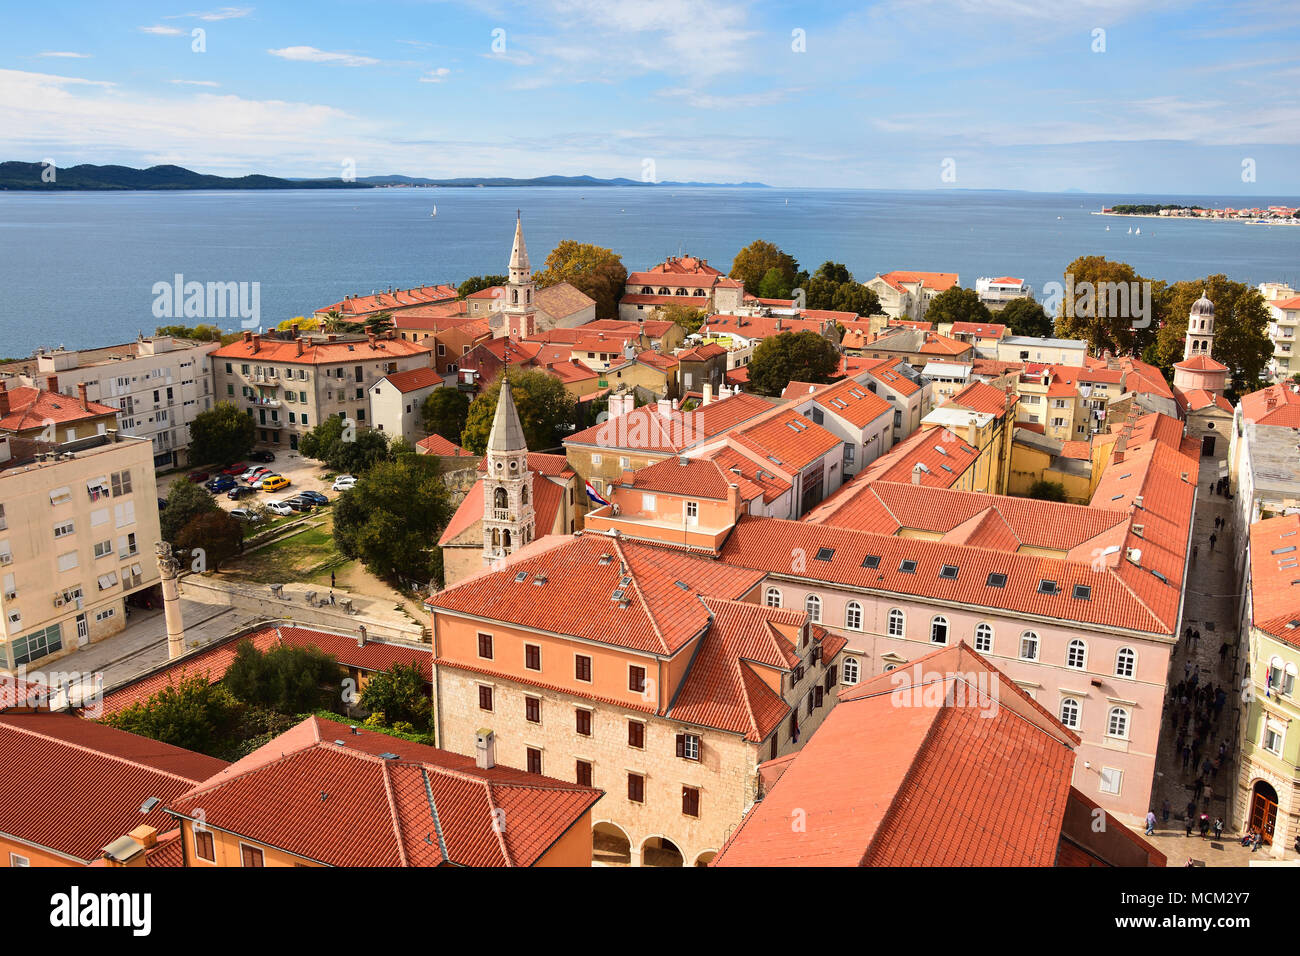 Aerial view of Zadar - famous historic Croatian city. Stock Photo